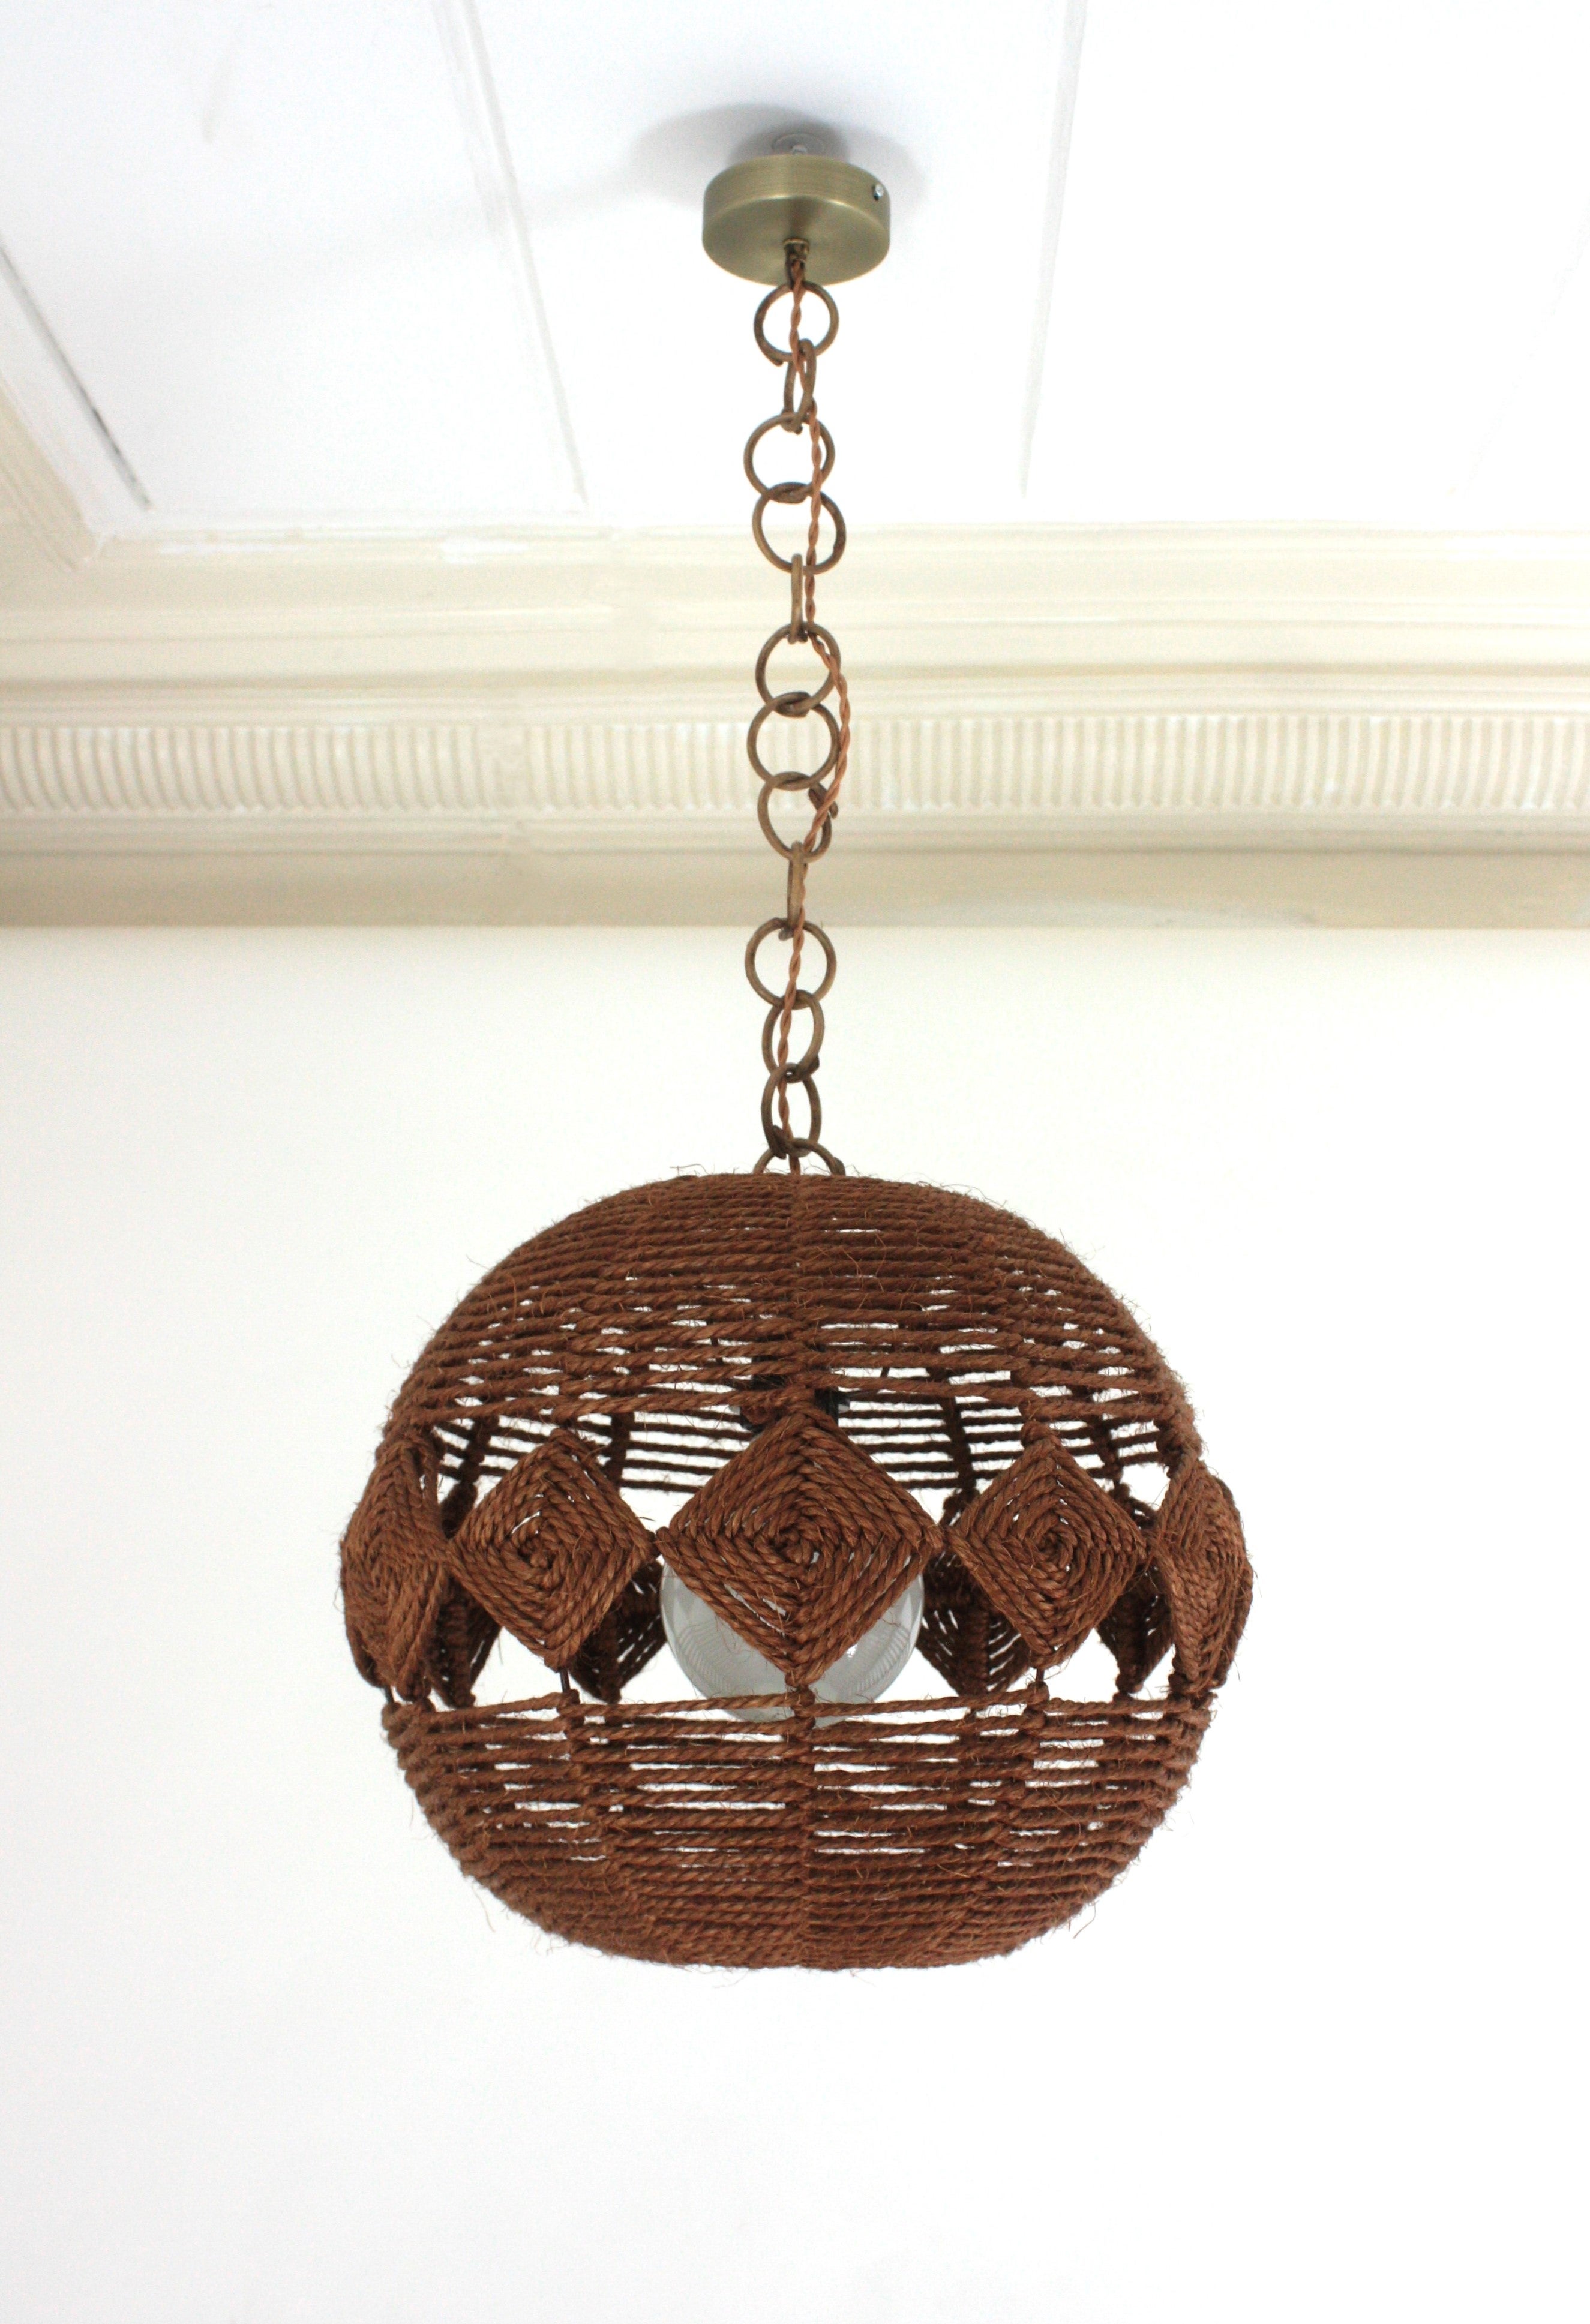 Mid-Century Modern Spanish Large Rope Ball Pendant Light Ceiling Hanging Lamp, 1960s For Sale